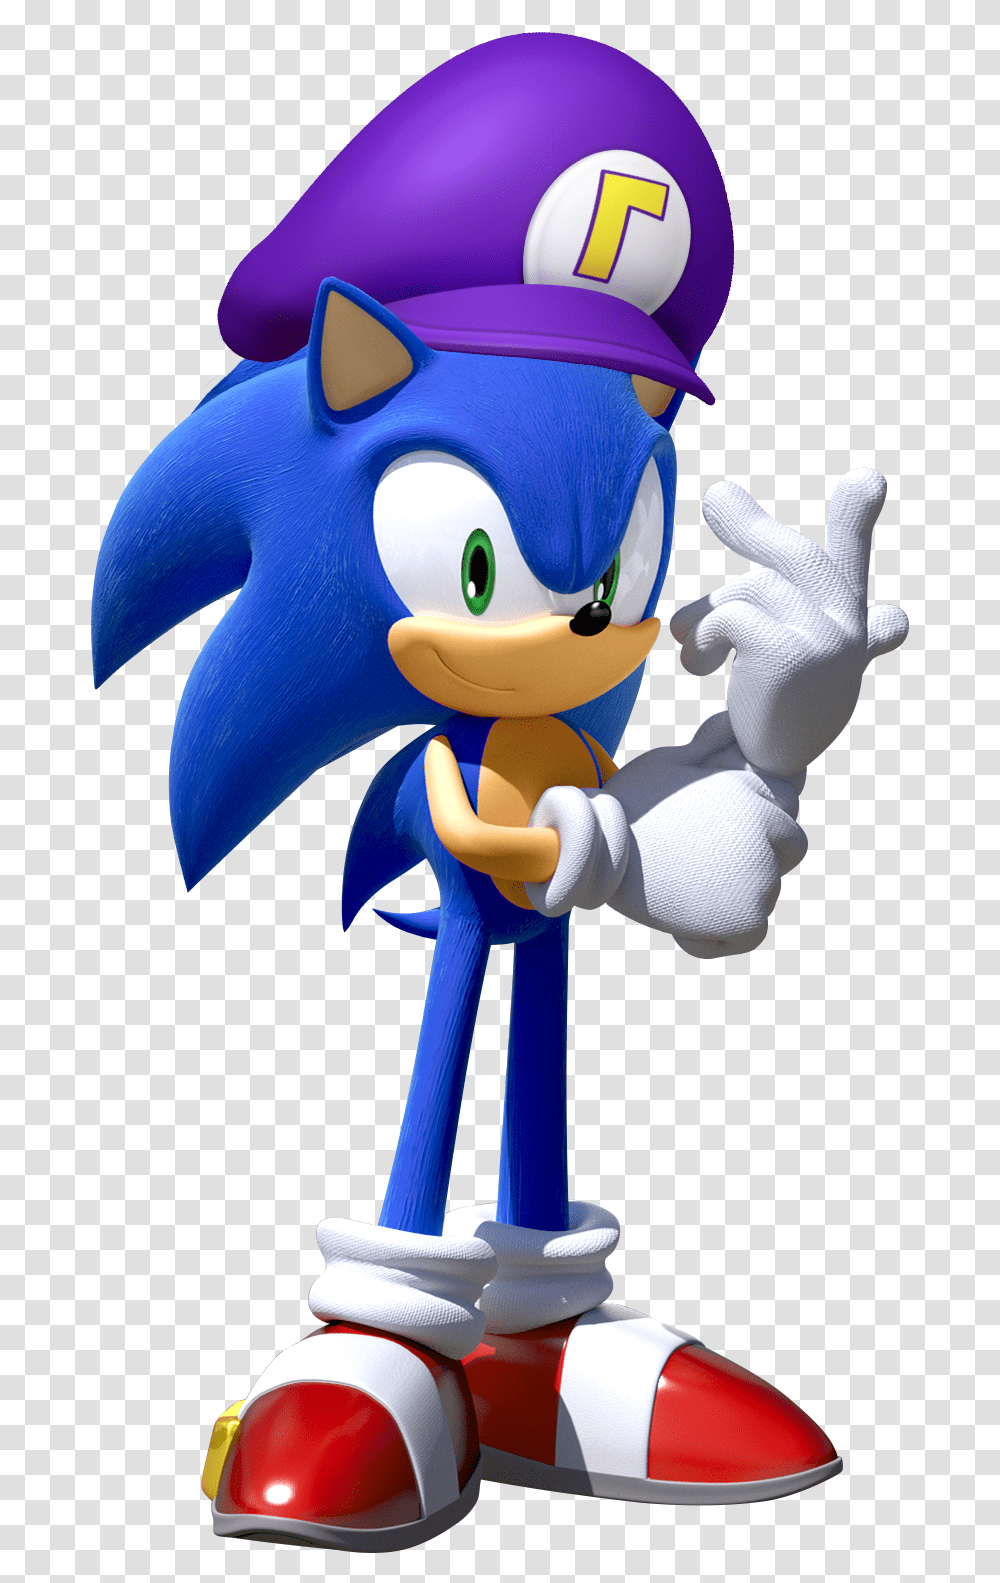 Waluigis Hat On Sonic Modern Sonic The Hedgehog, Toy, Figurine, Mascot, Sweets Transparent Png